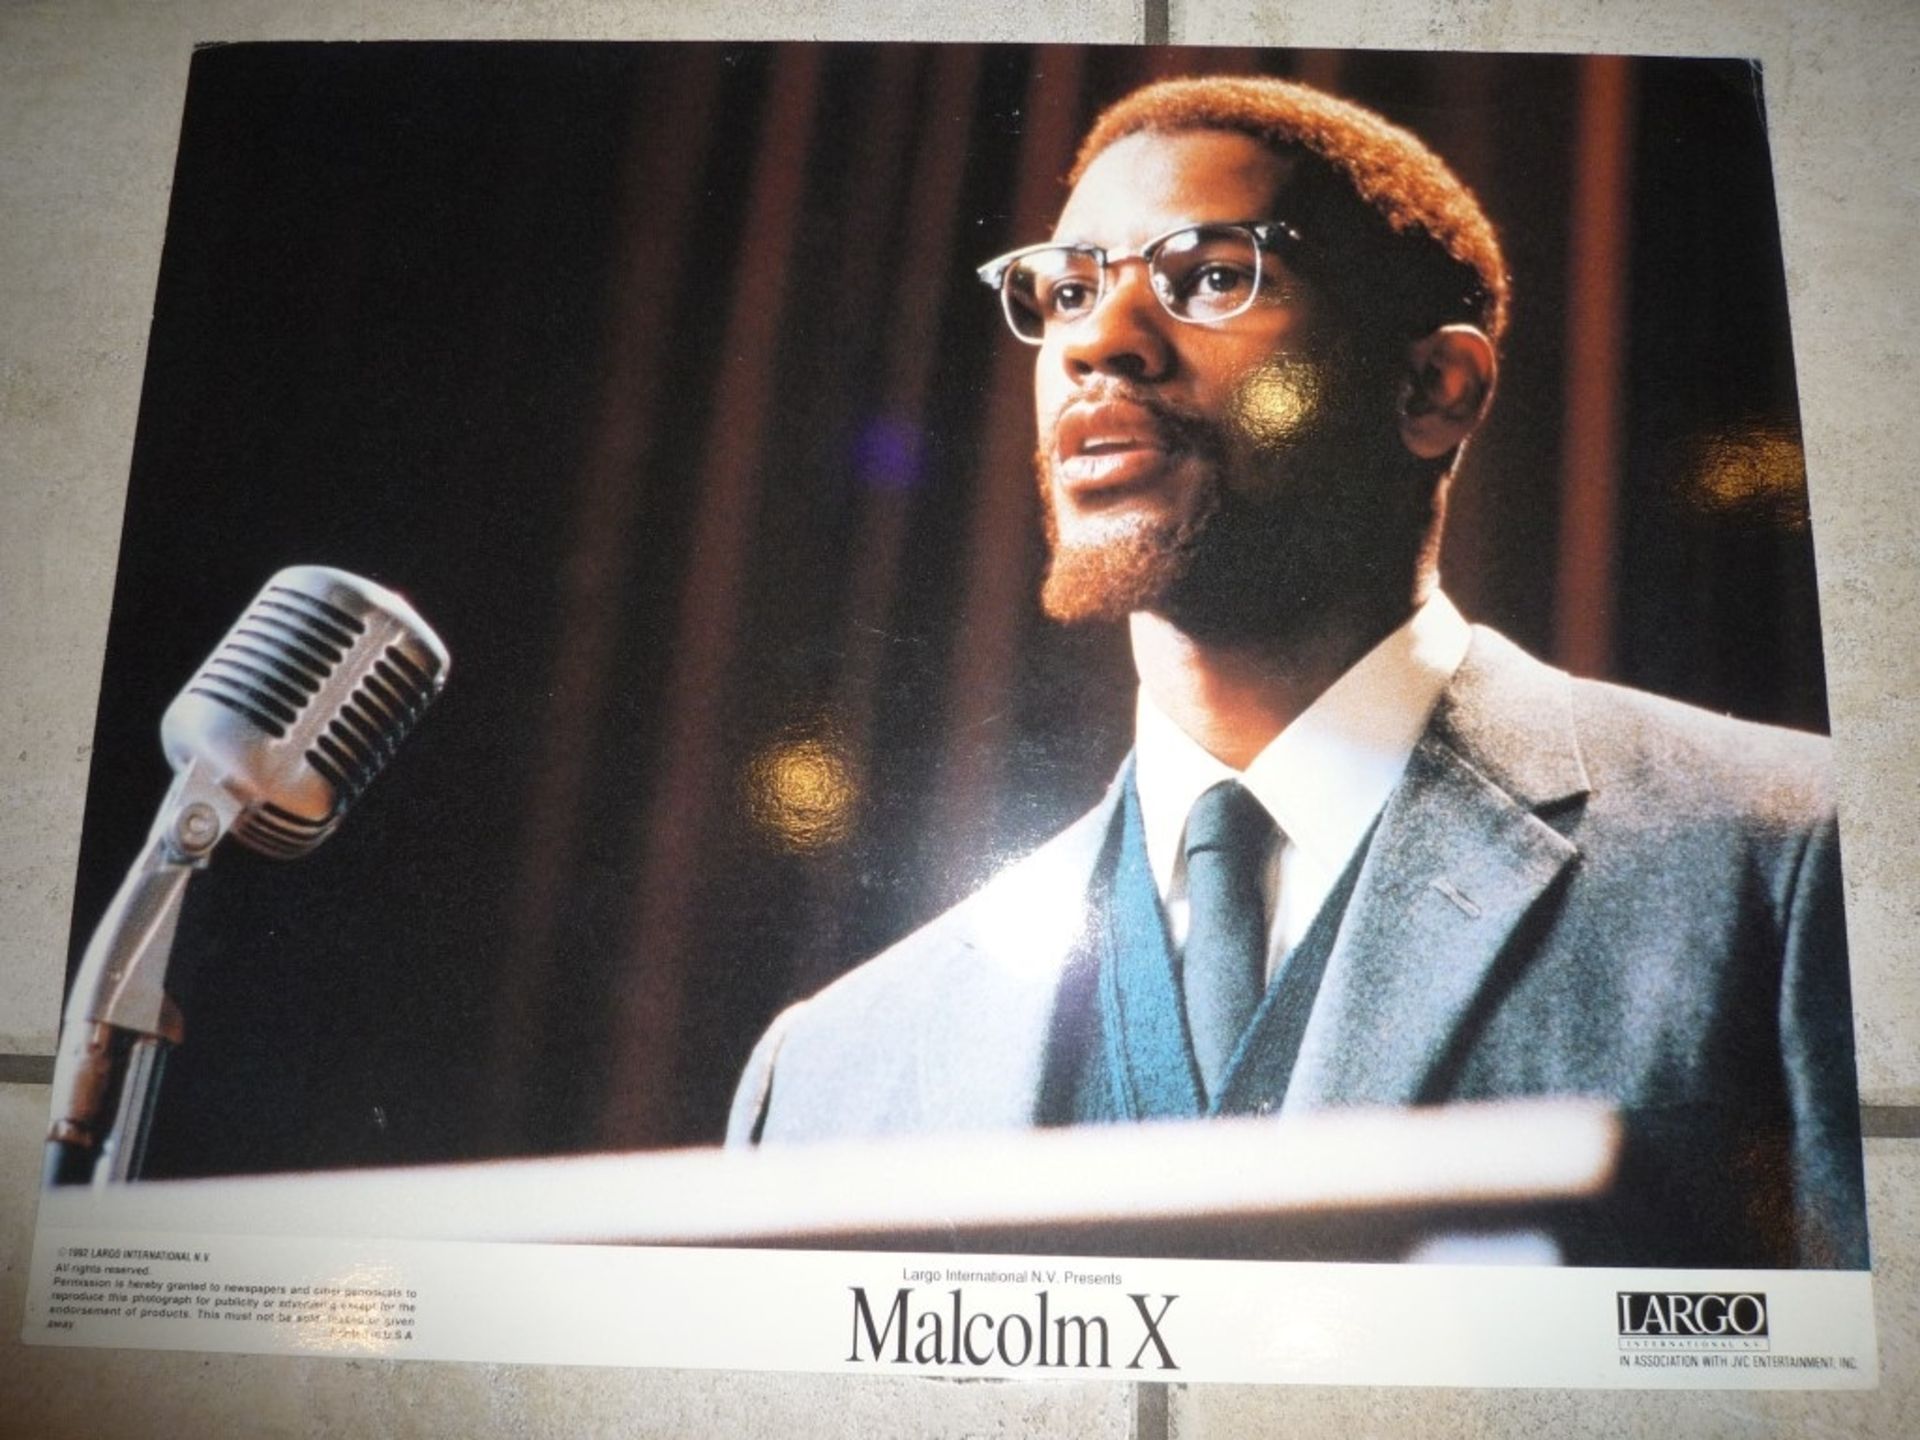 Malcolm X lobby card - Image 2 of 2